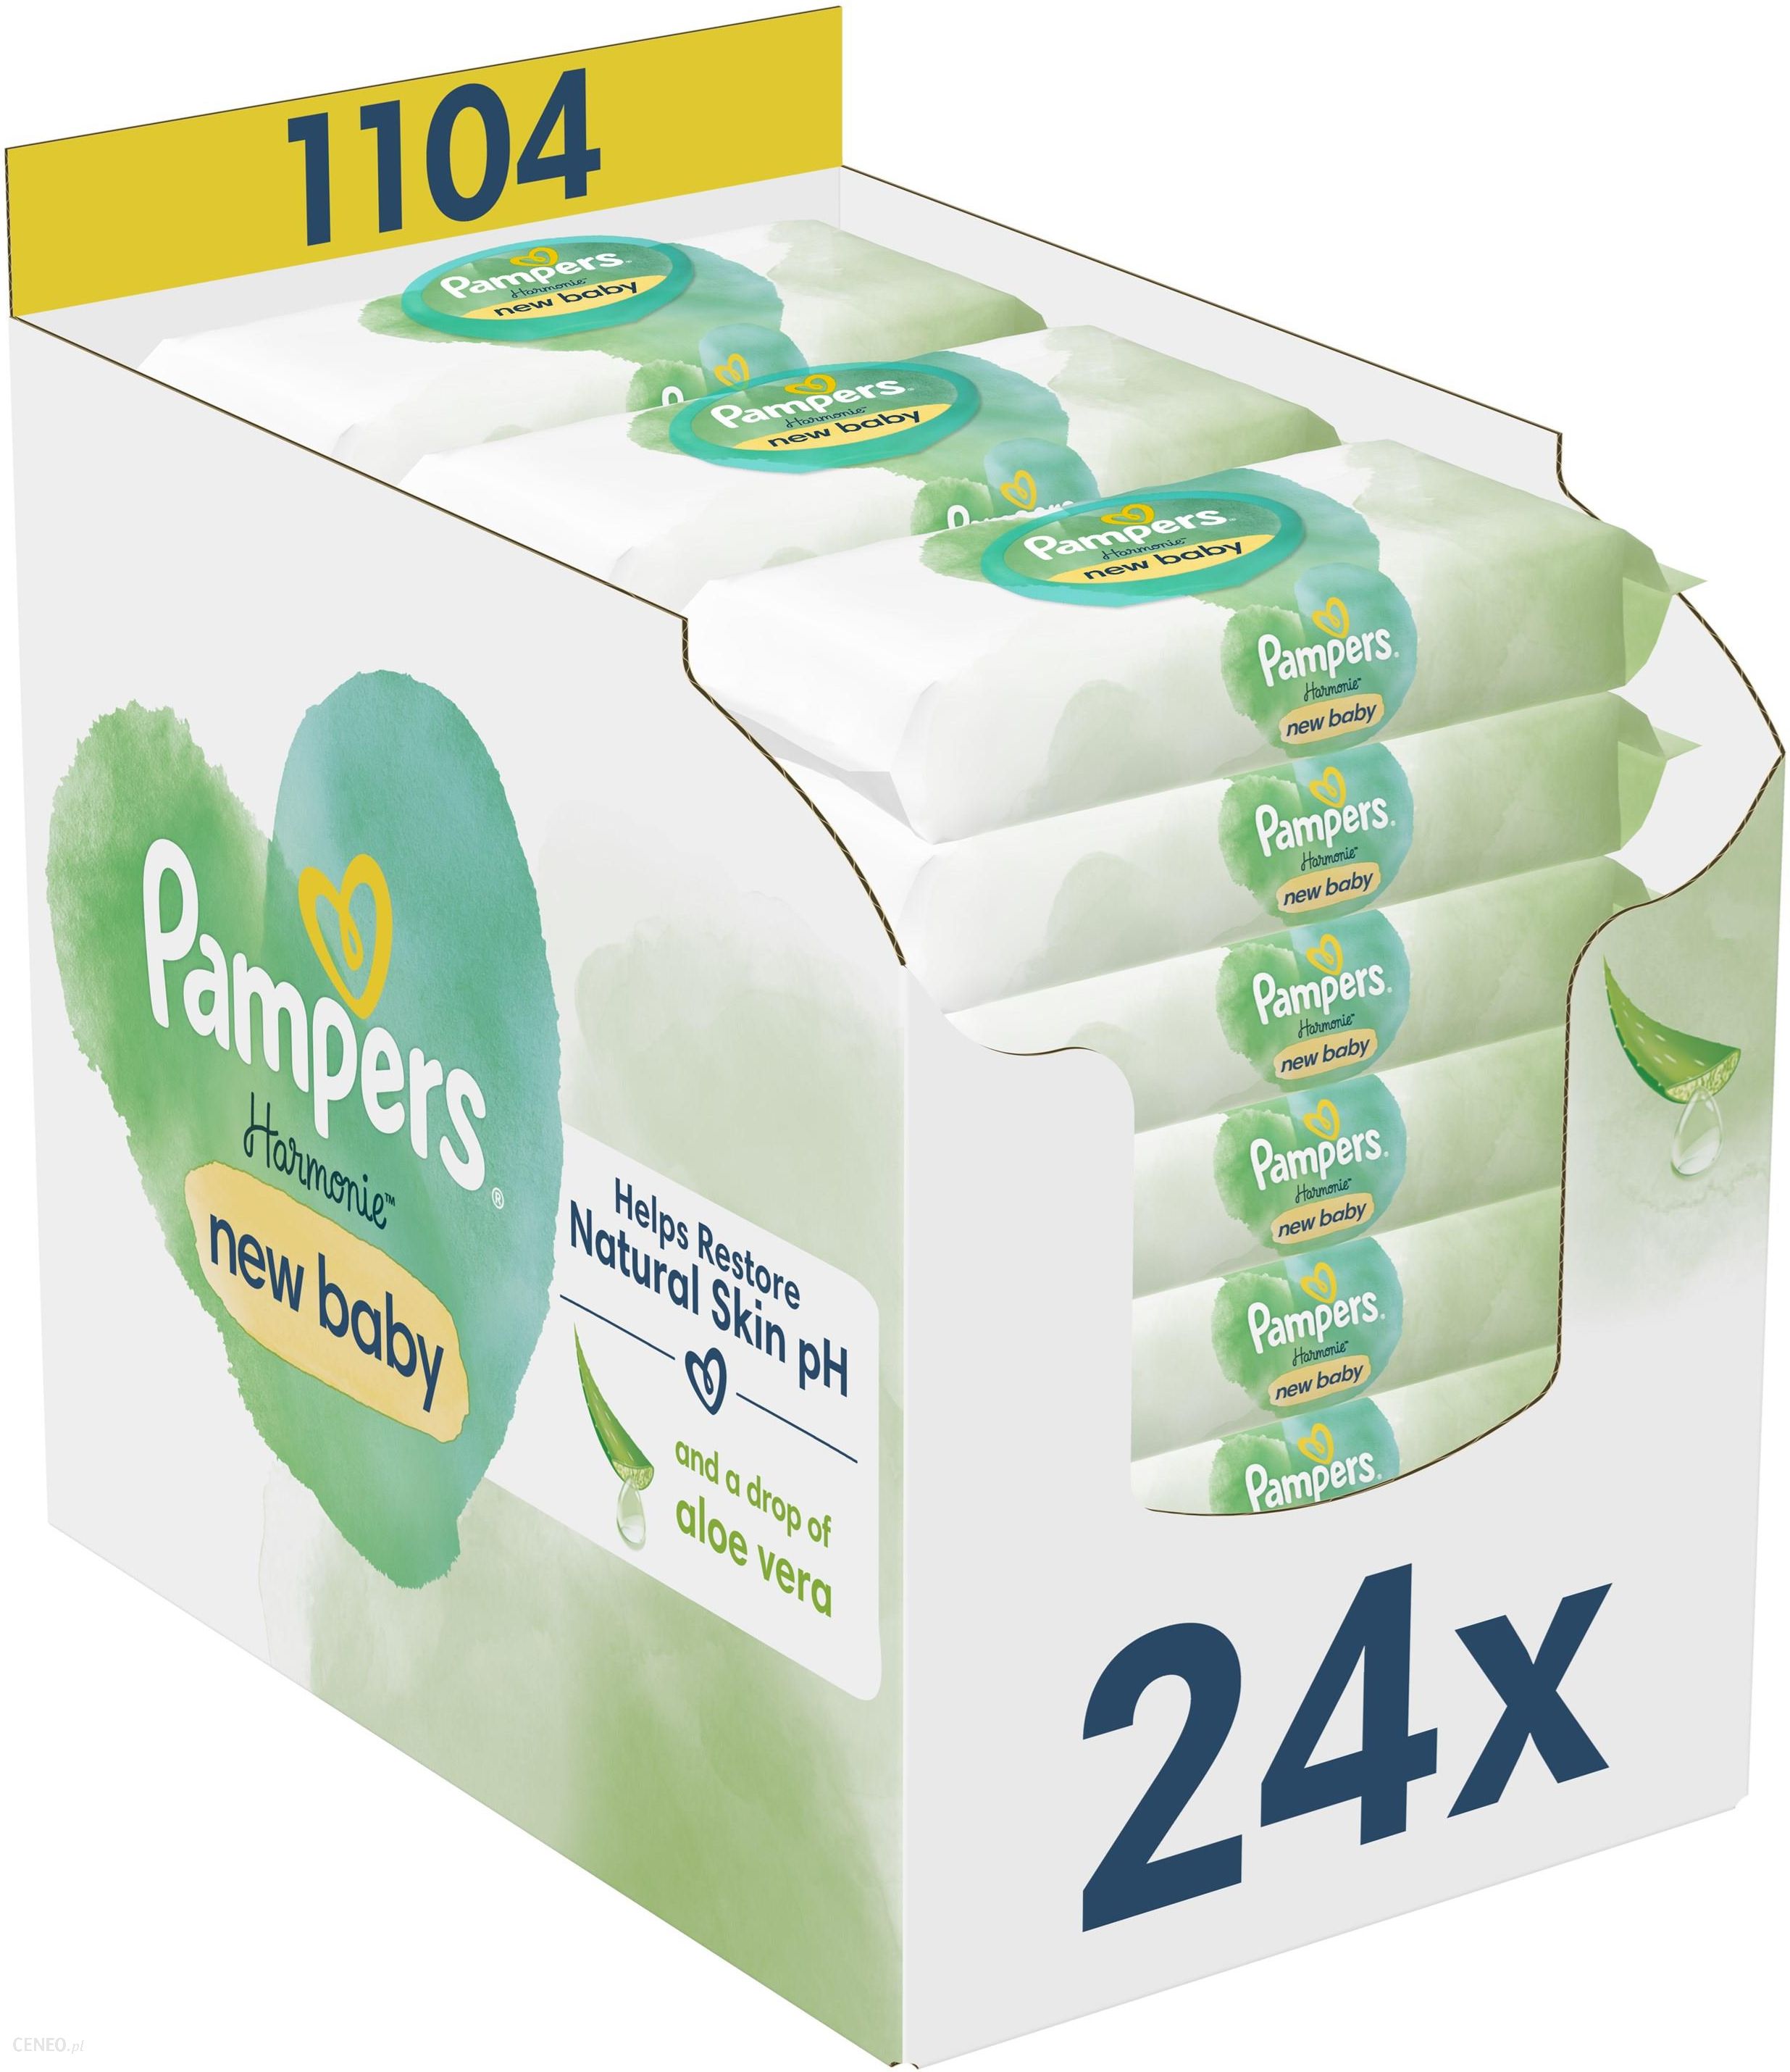 pampers new baby ceneo